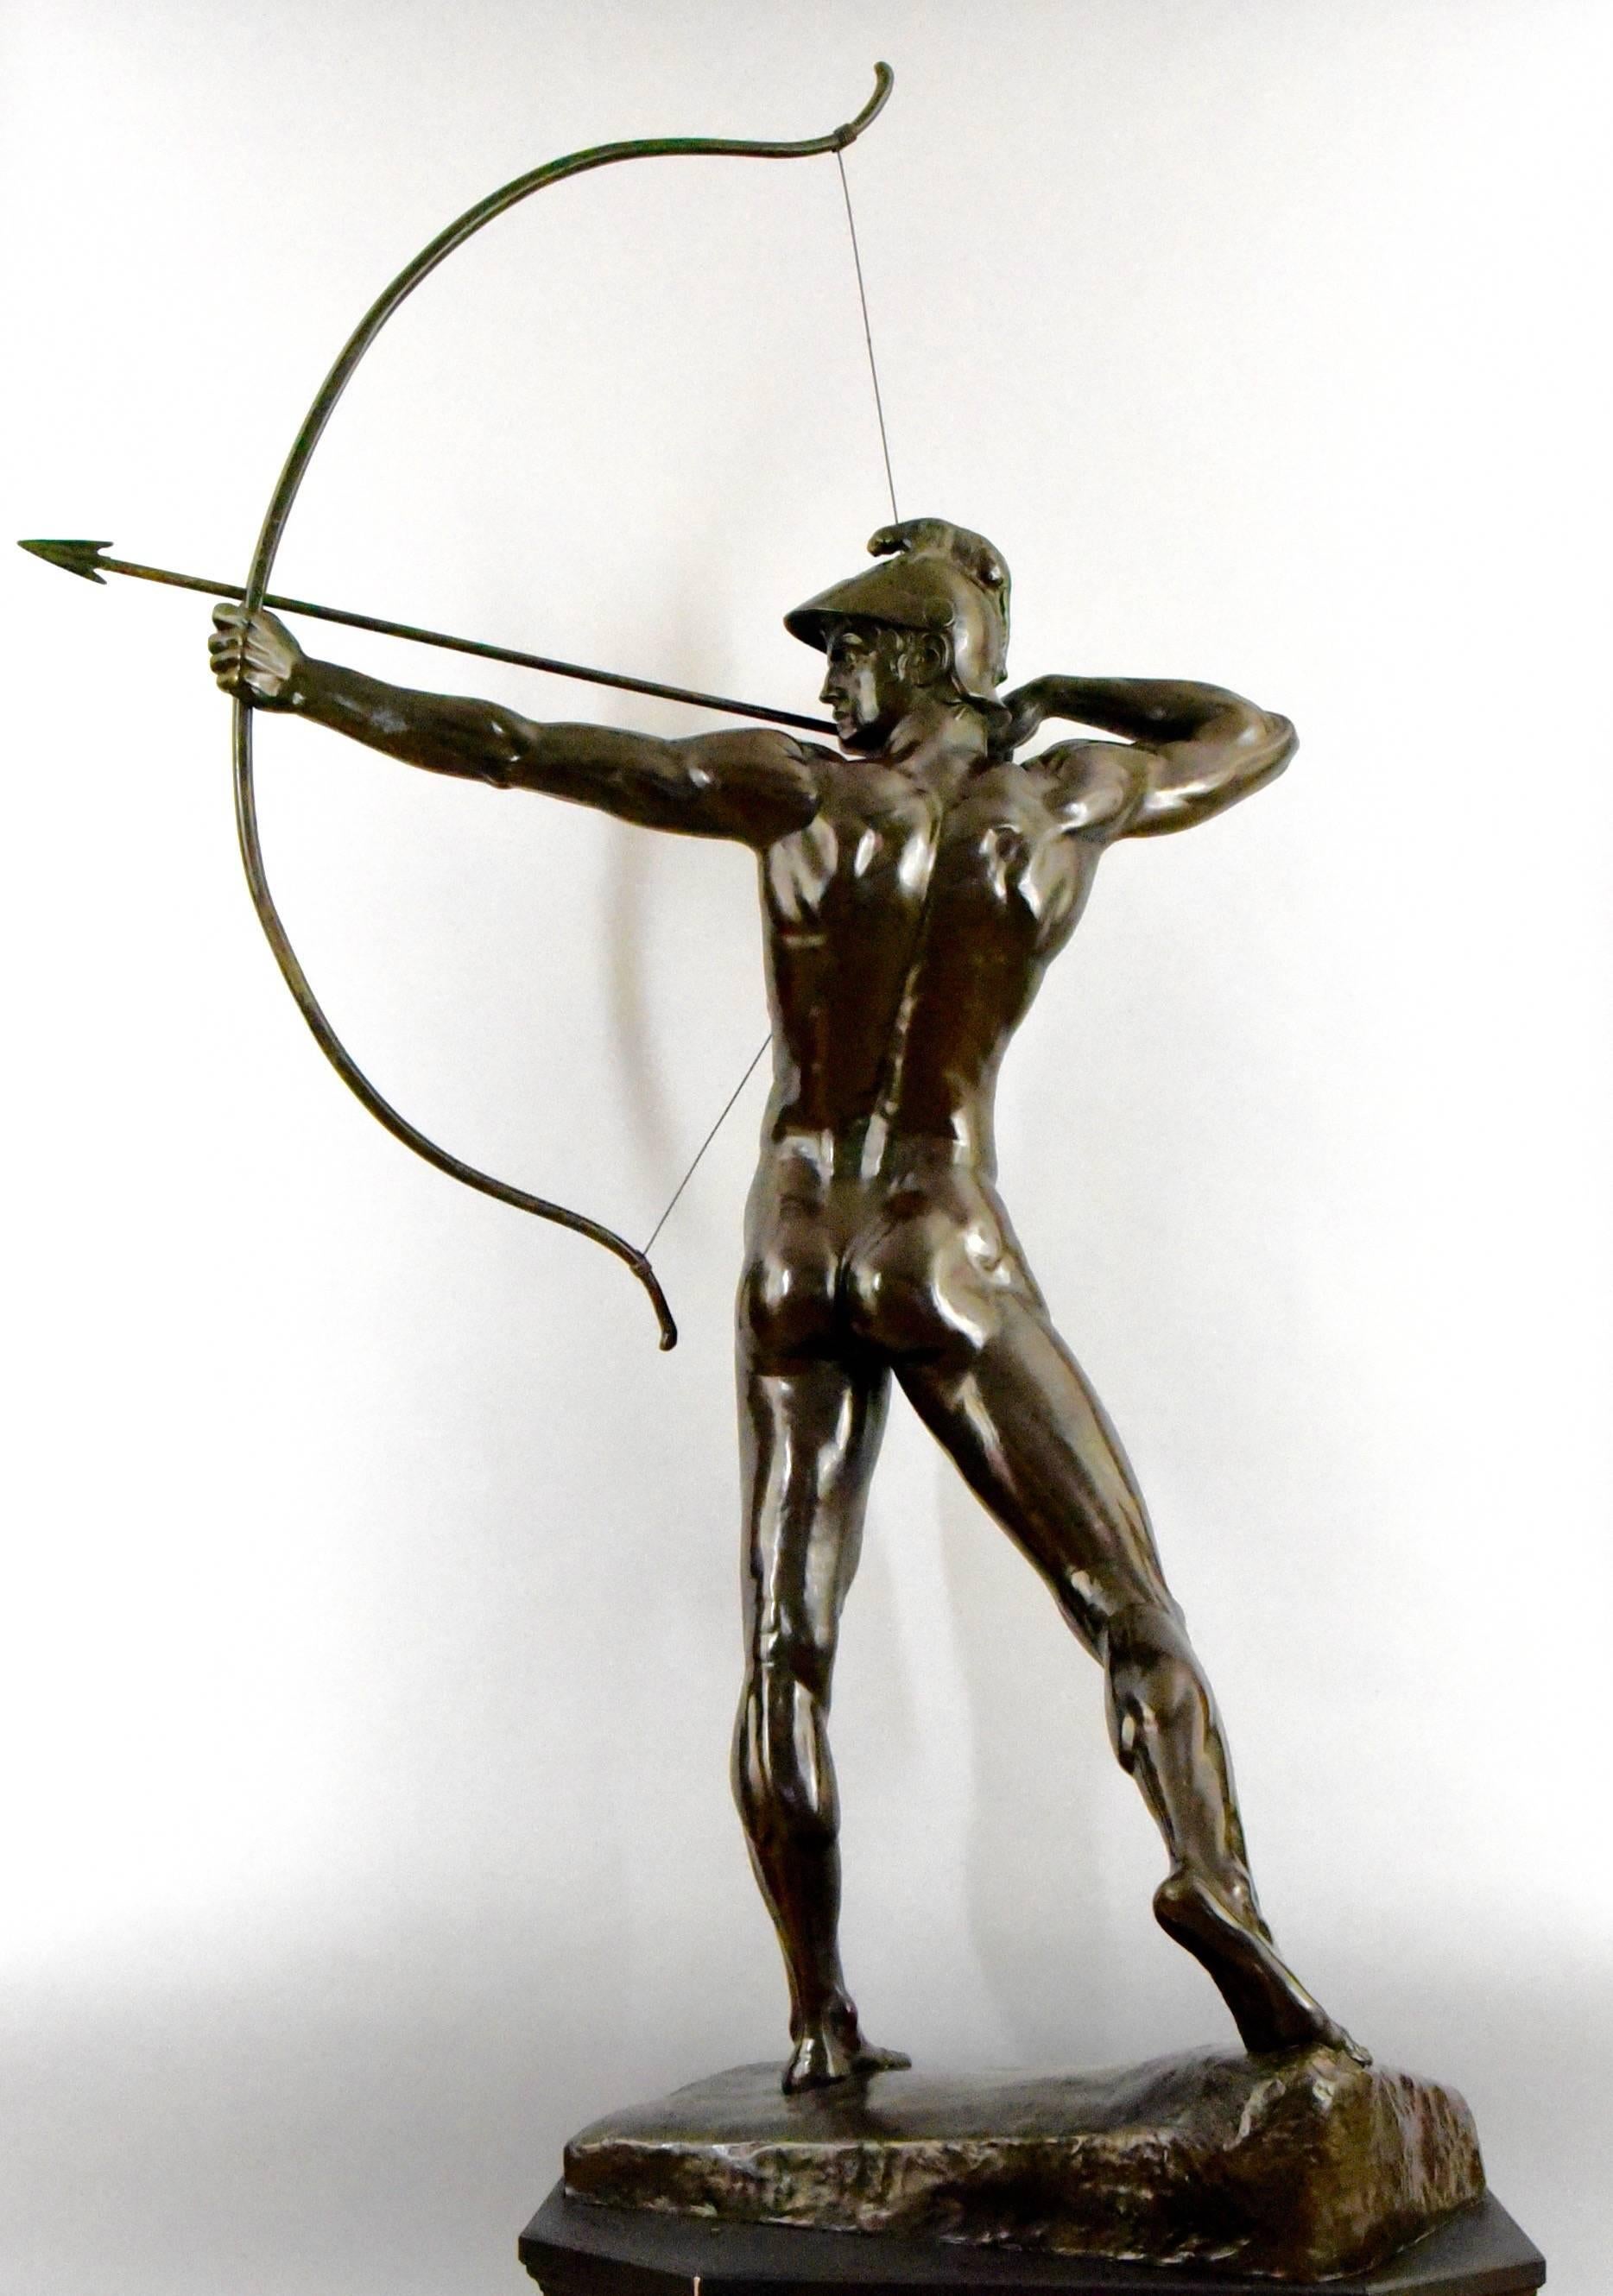 Romantic Life size Bronze Sculpture Male Nude Archer by Ernst Moritz Geyger H. 60 inch